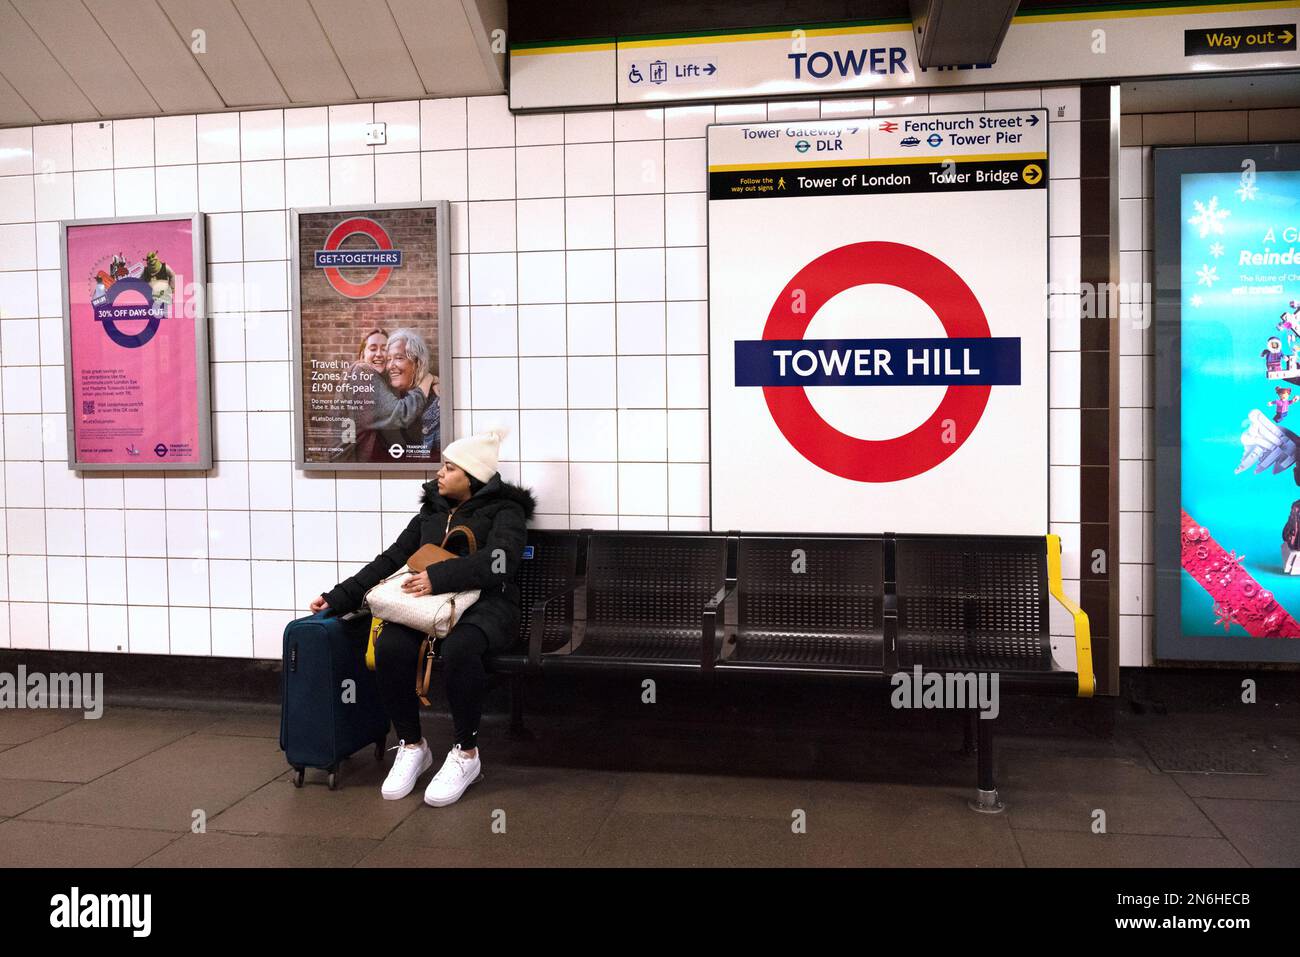 London, England, UK. Woman sitting on a bench on the platform of Tower Hill underground station Stock Photo